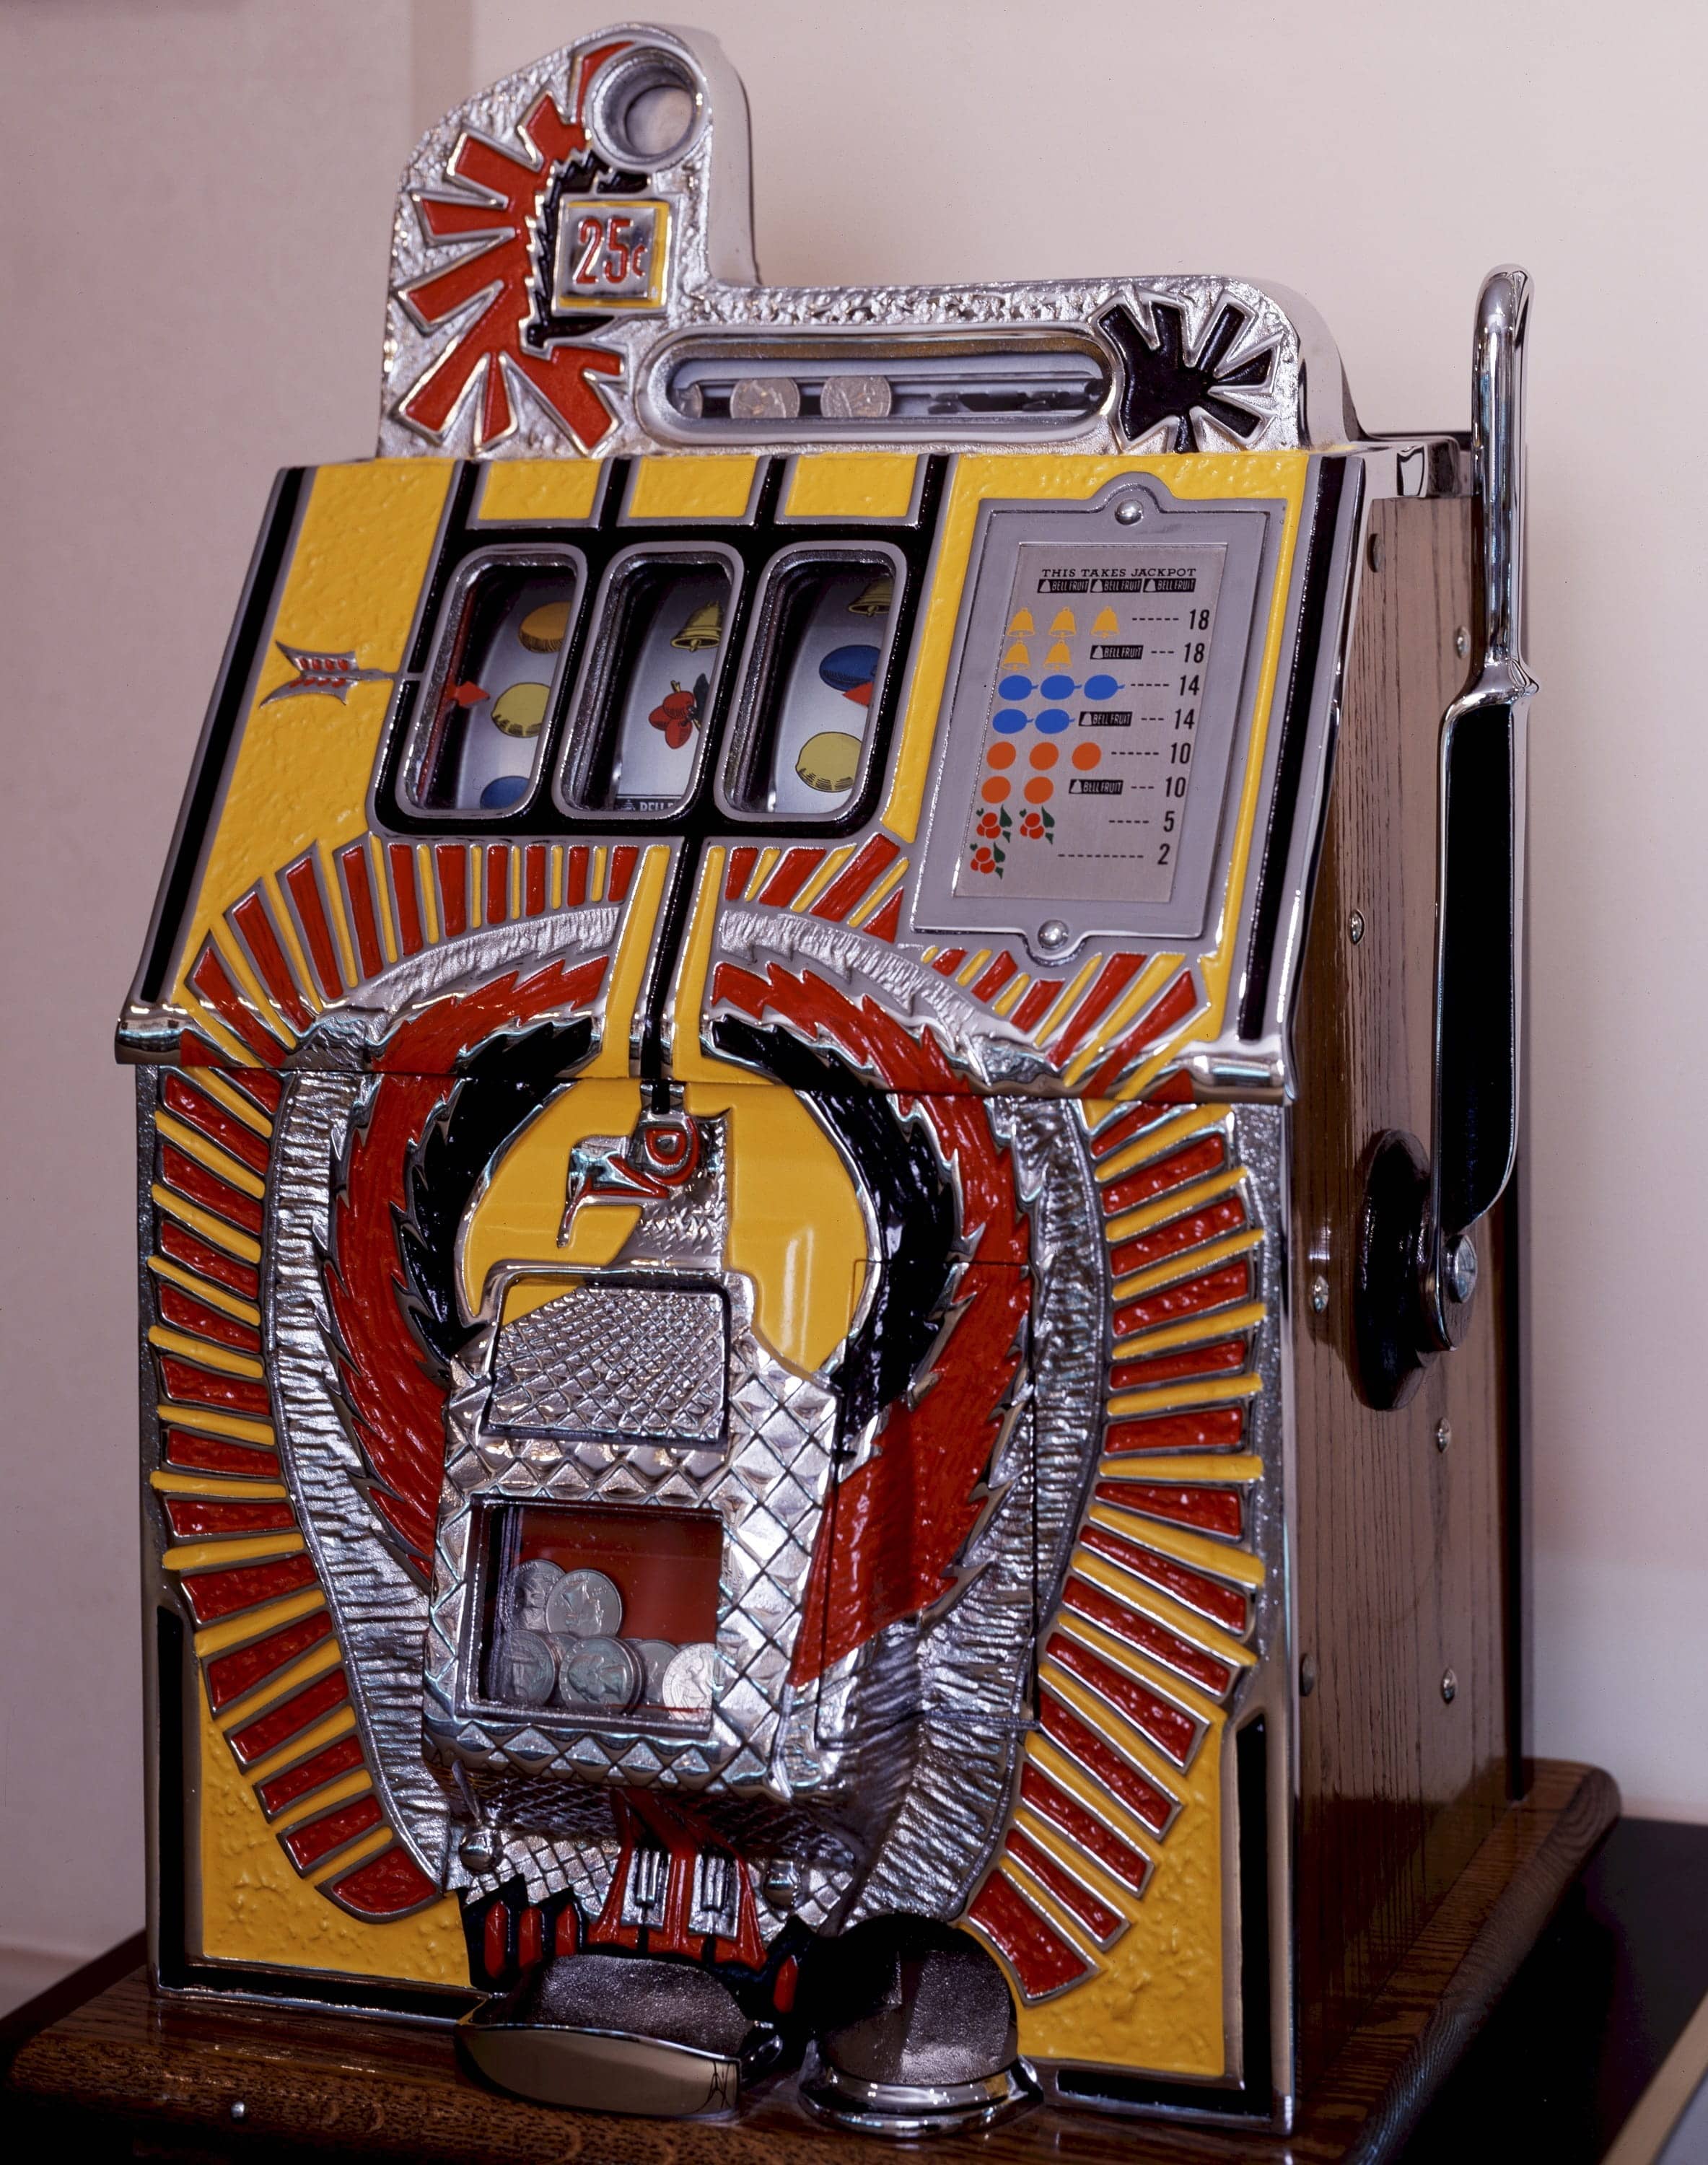 Geek insider, geekinsider, geekinsider. Com,, charles fey and the origins of the fruit machine, gaming